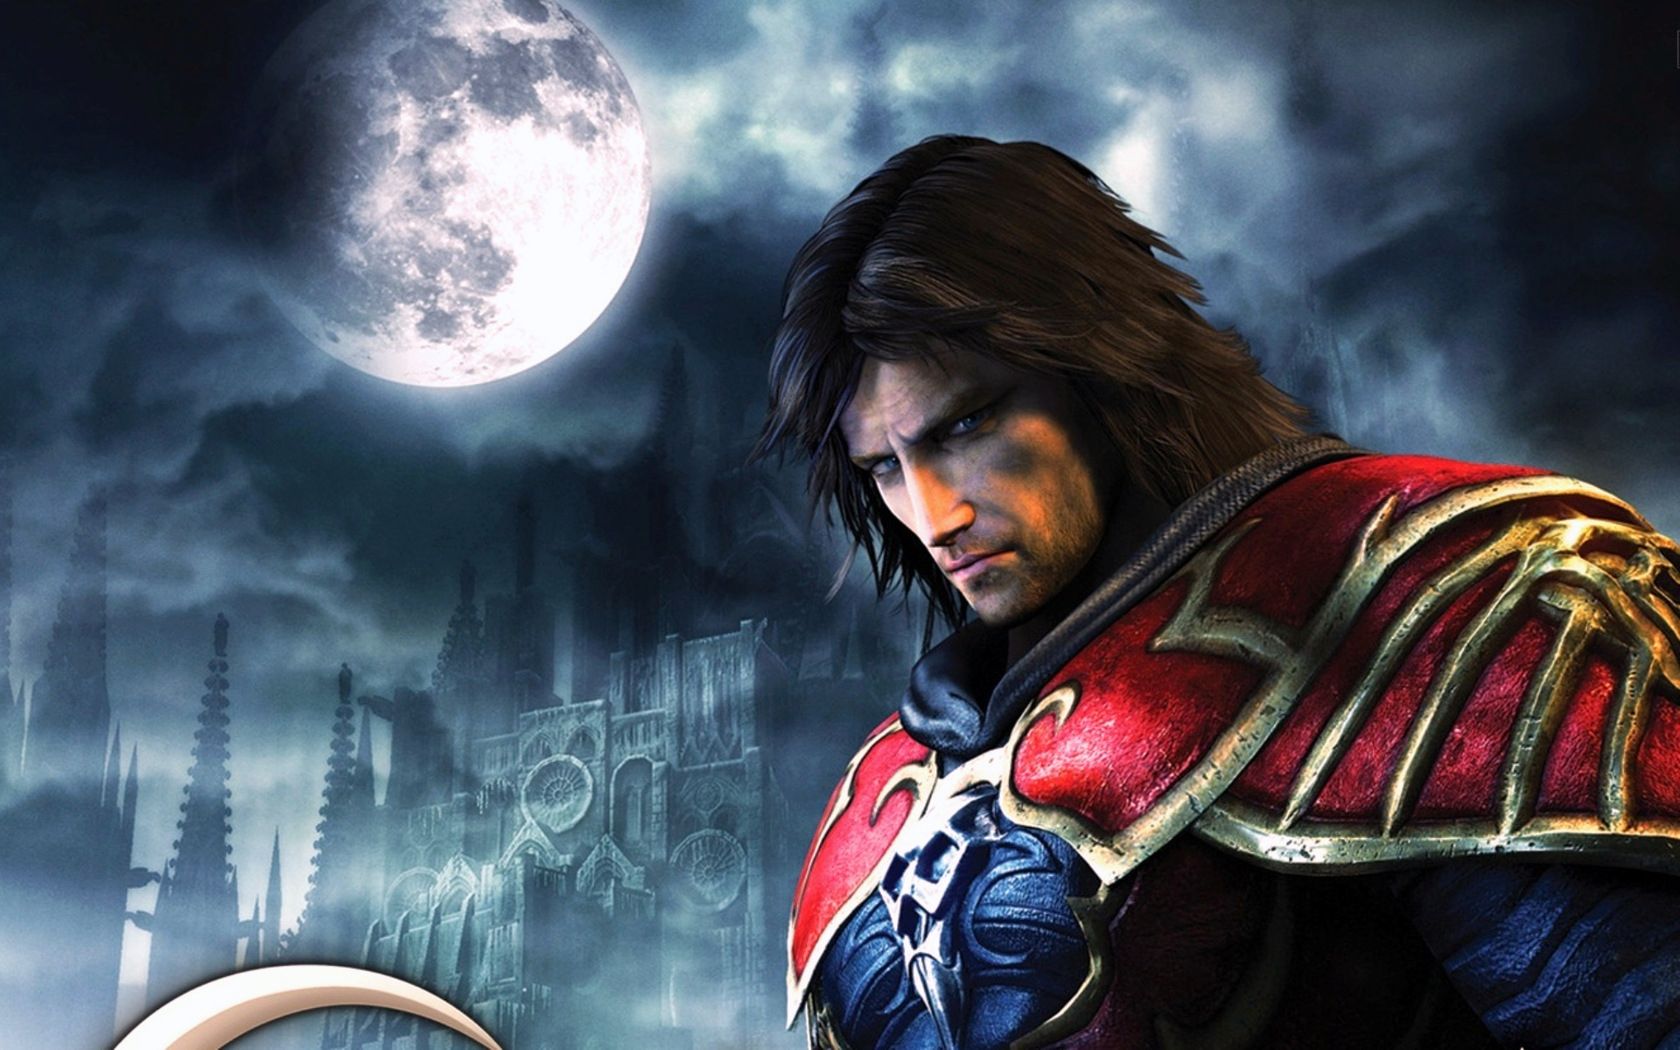 Image Castlevania Castlevania Lords of Shadow vdeo game